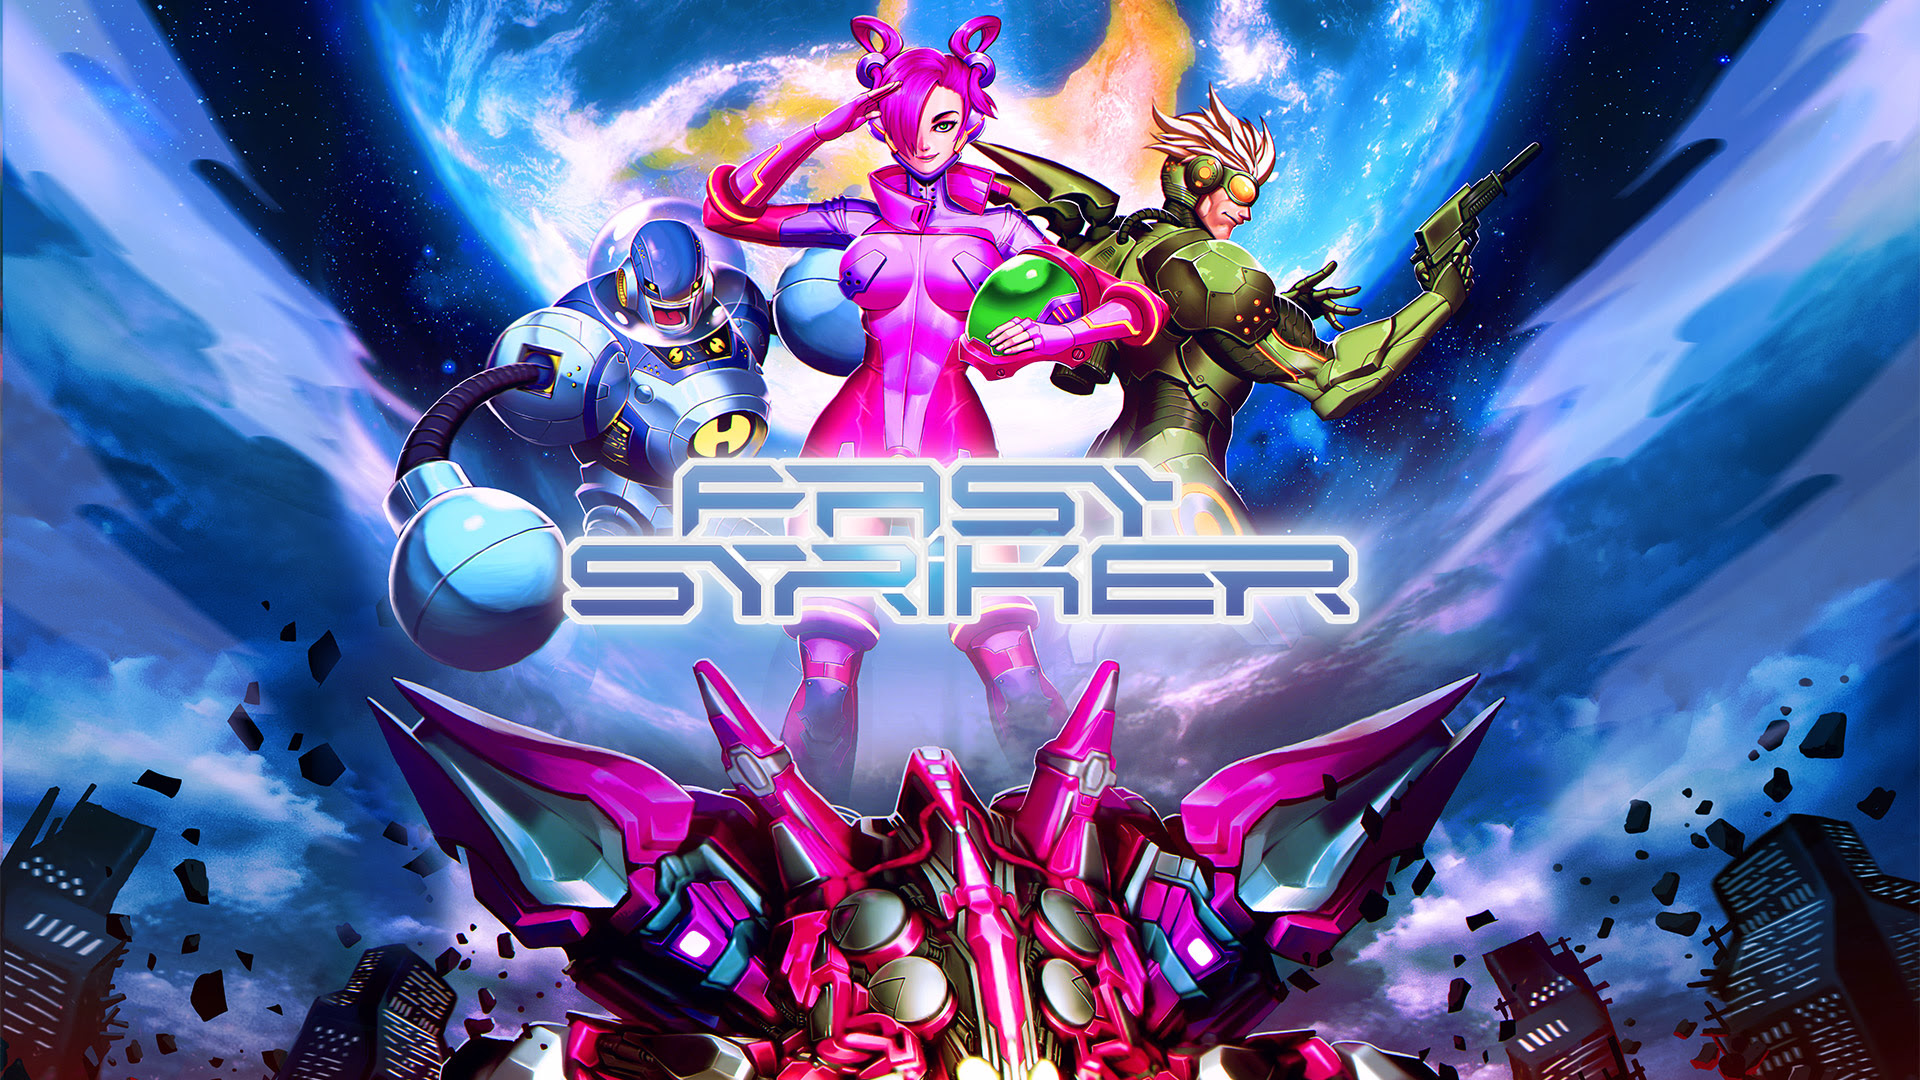 NEWS – Retro Shmup Fast Striker will support cross-buy on PS4 and Vita